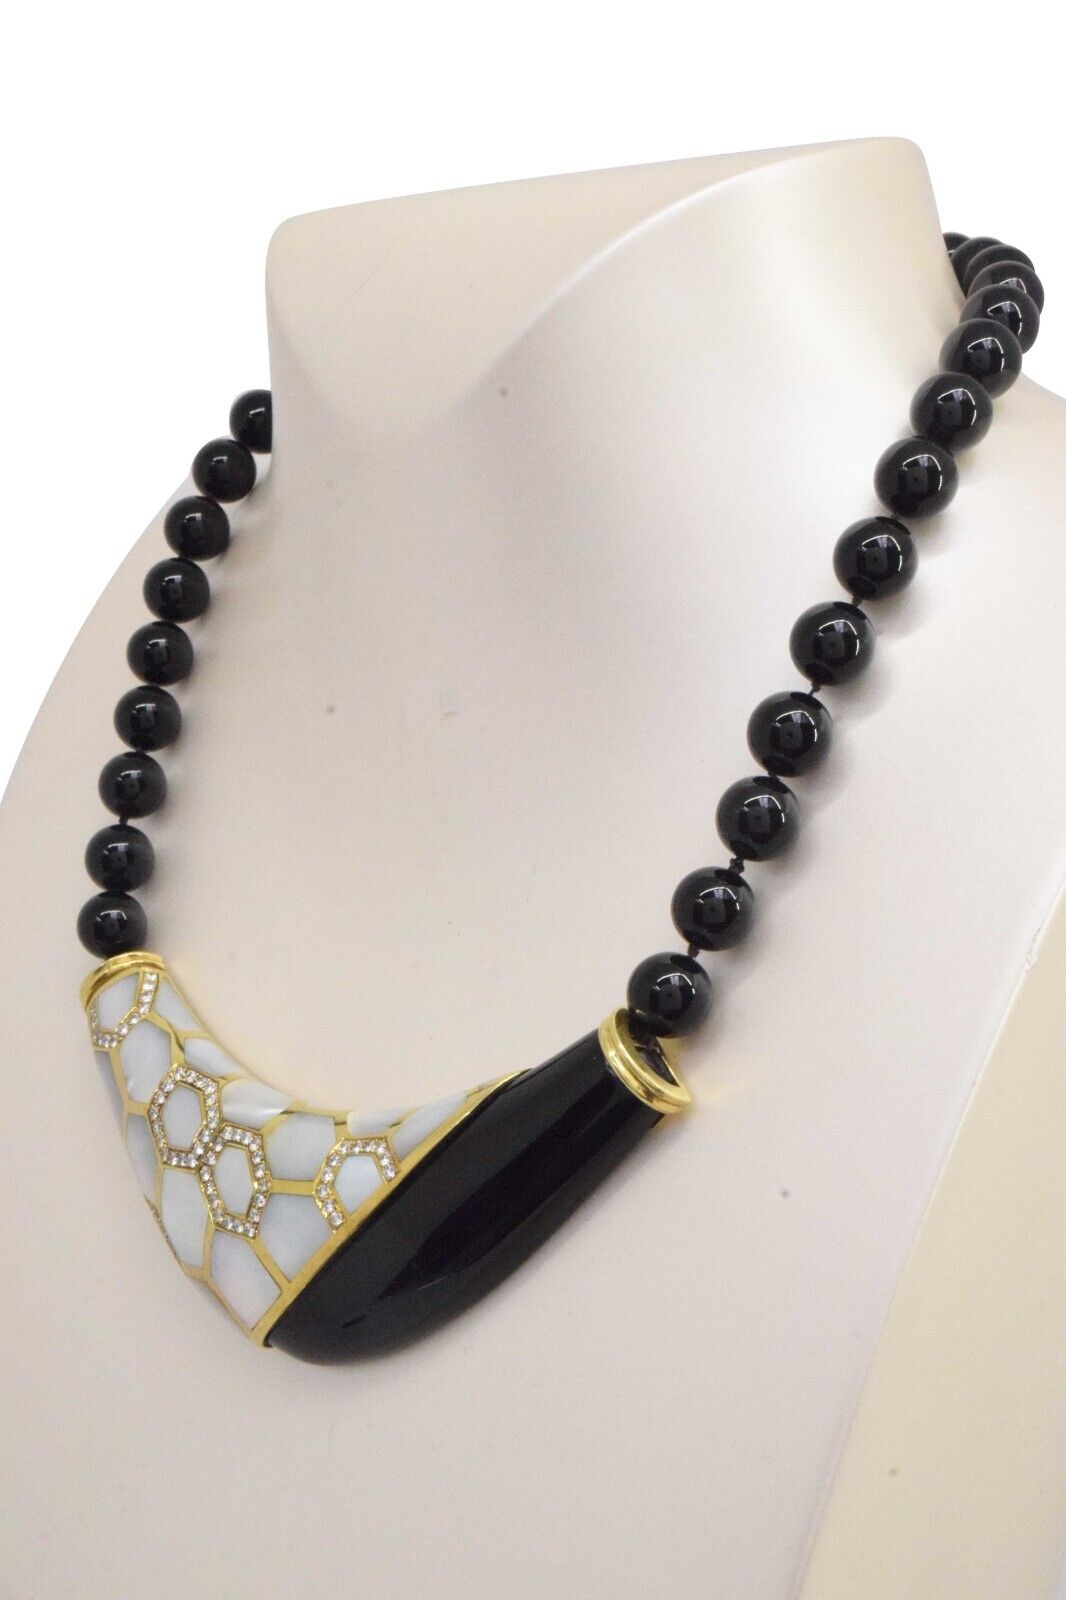 1.38 Carat Diamond & Onyx & Mother of Pearl Necklace in 14k Yellow Gold